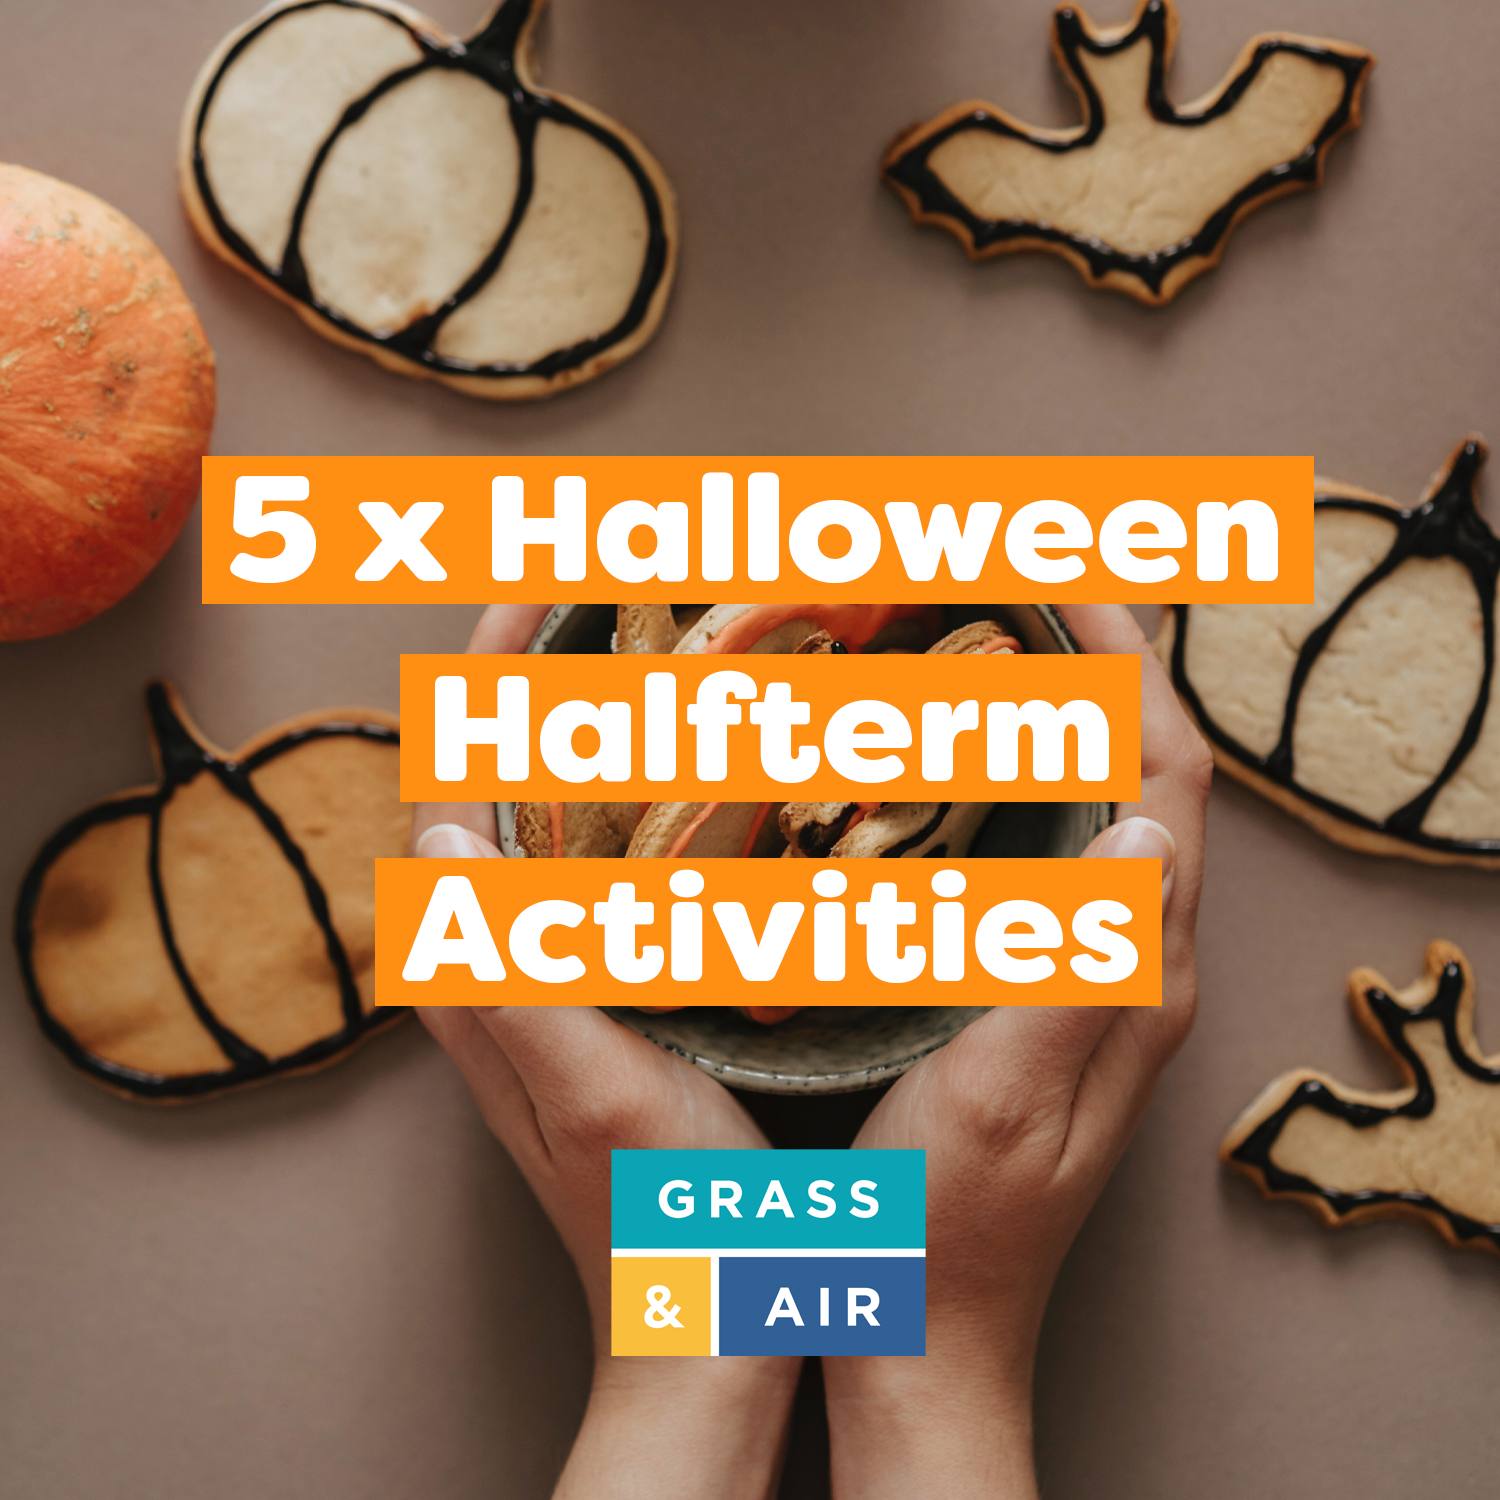 5 Halloween Half Term Activities To Do with Your Family